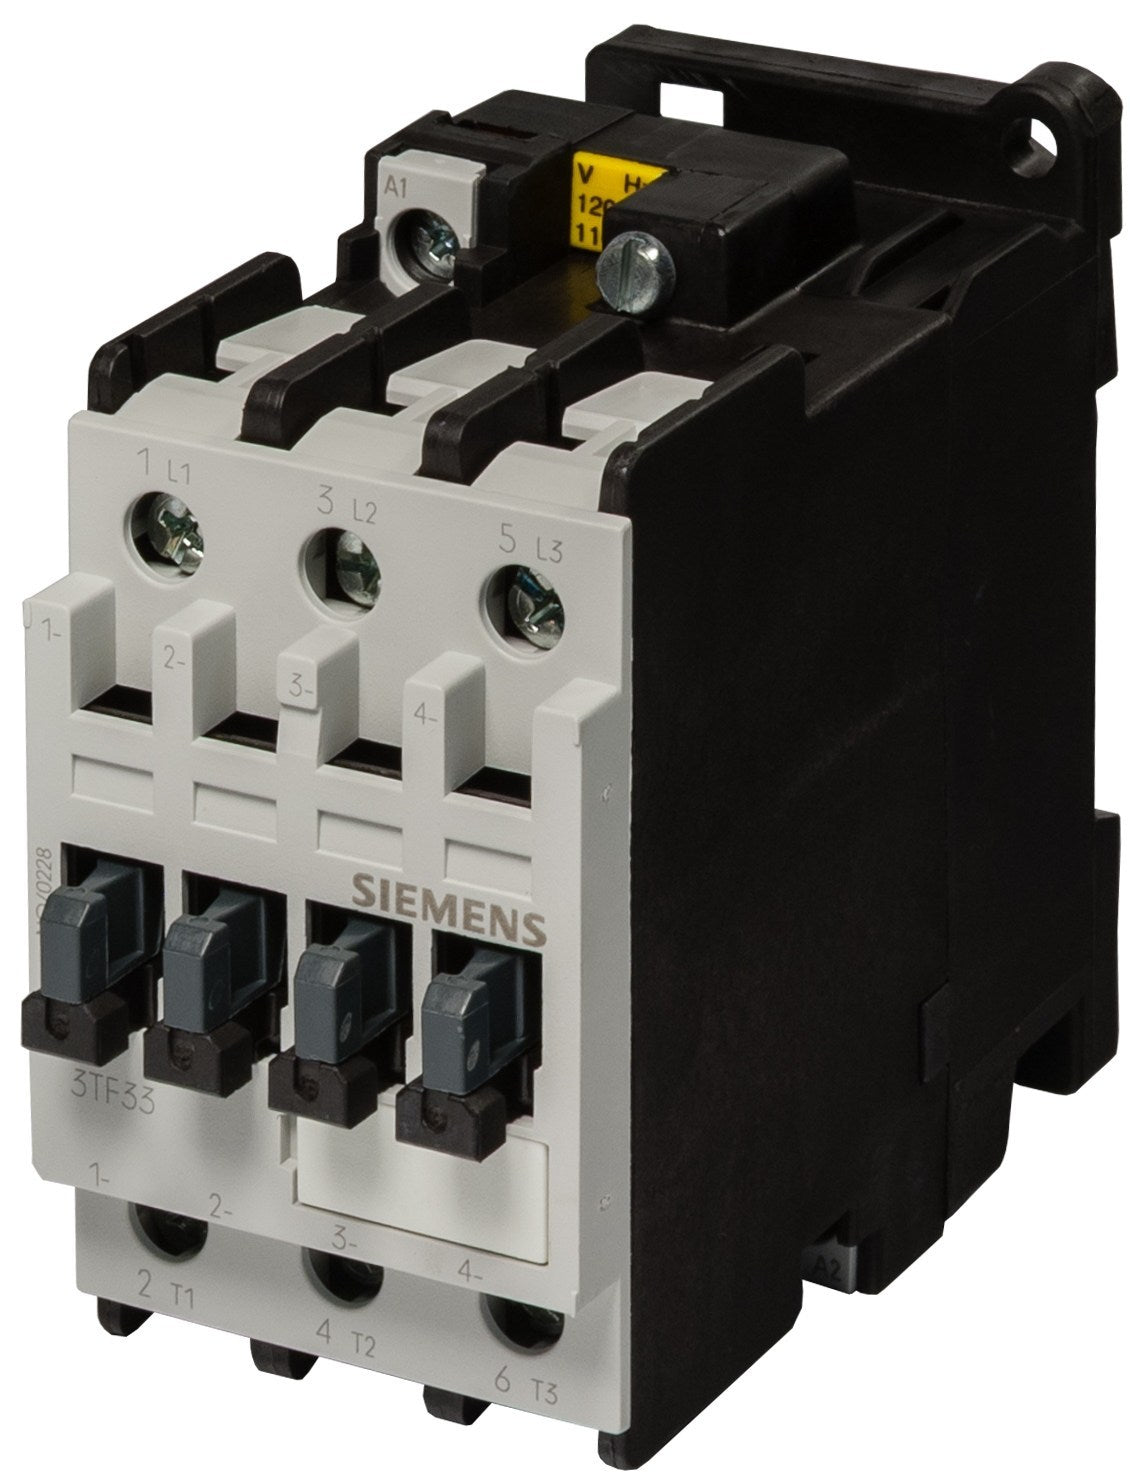 3TF3300-0AP0 CONTACTOR SIZE 1 3POLE AC3 11KW 400 380V WITHOUT AUXILIARY CONTACT AUX CONT BLOCKS F PLUGGING ON AC OPERATION AC 230 220V 50HZ 276 264V 60HZ